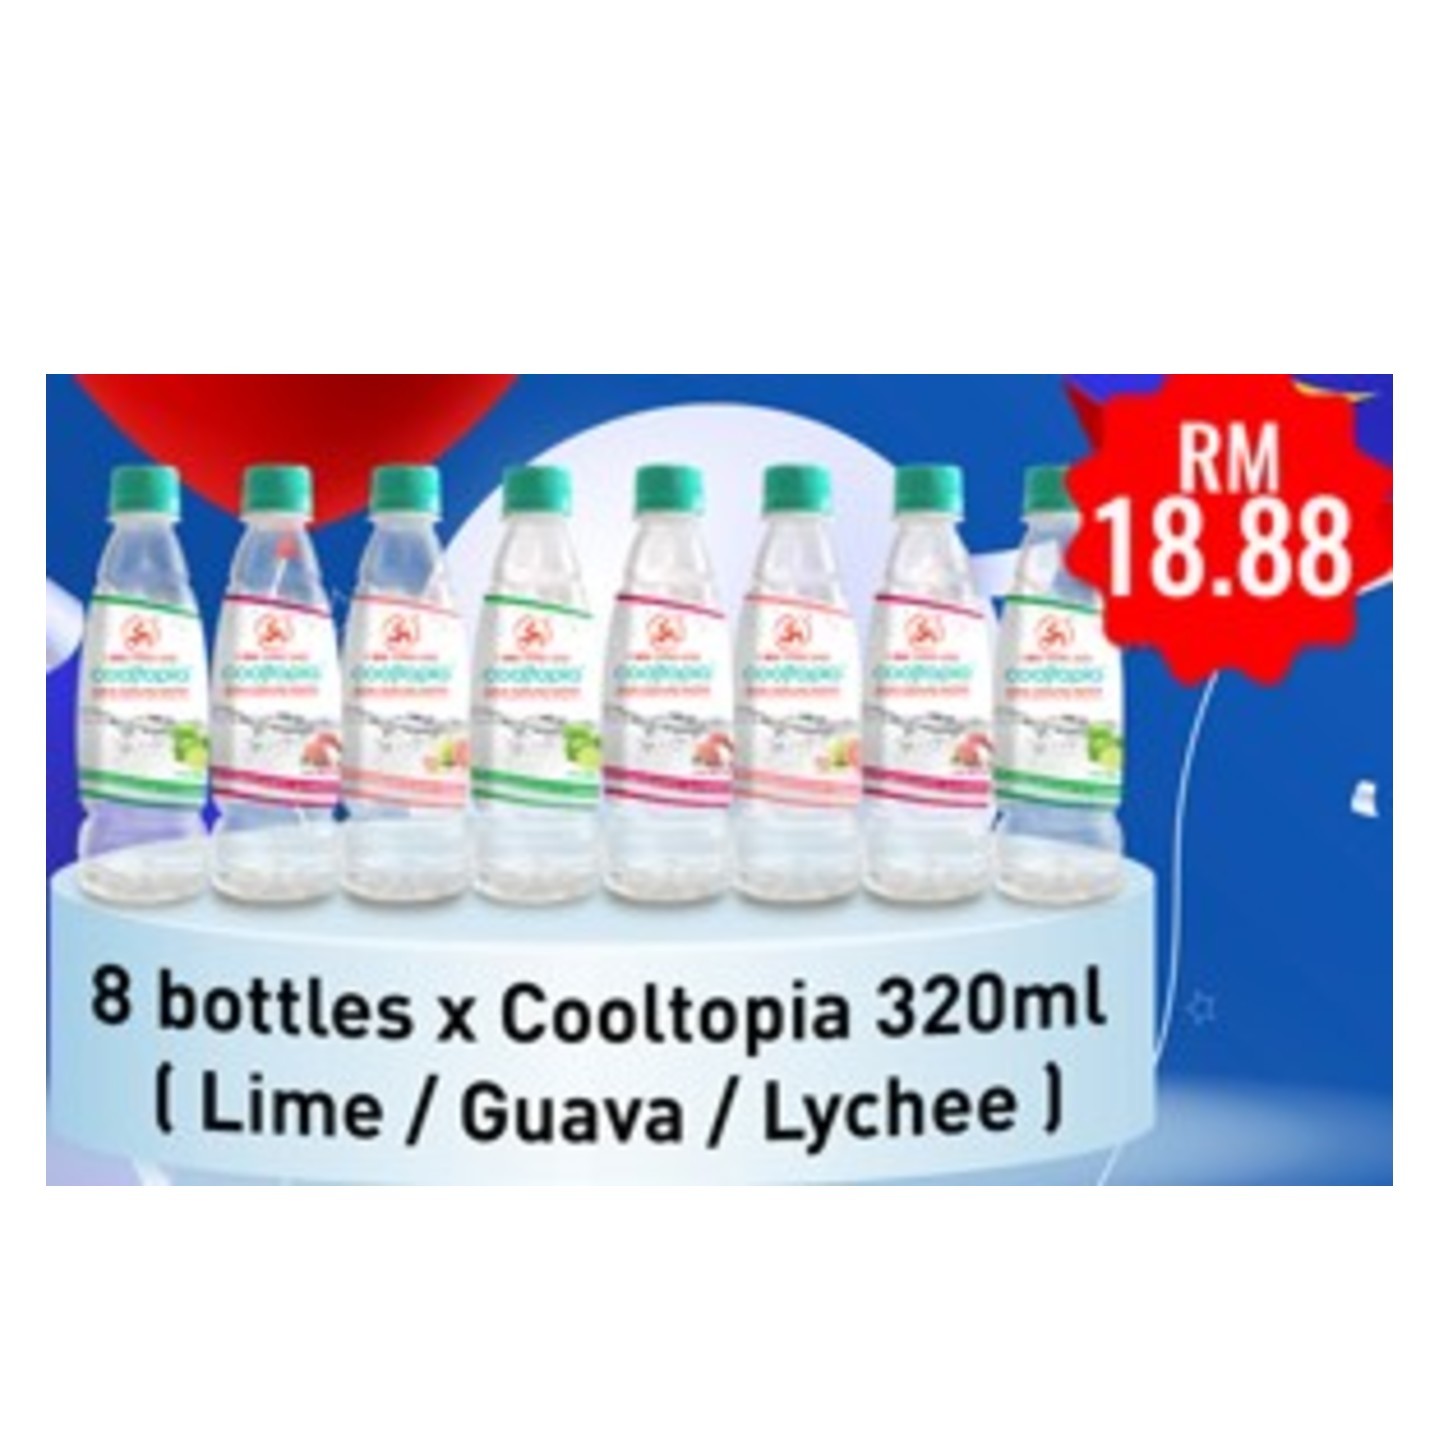 PACKAGE 4: COOLTOPIA COOLING WATER - GUAVA 320ML X 8 